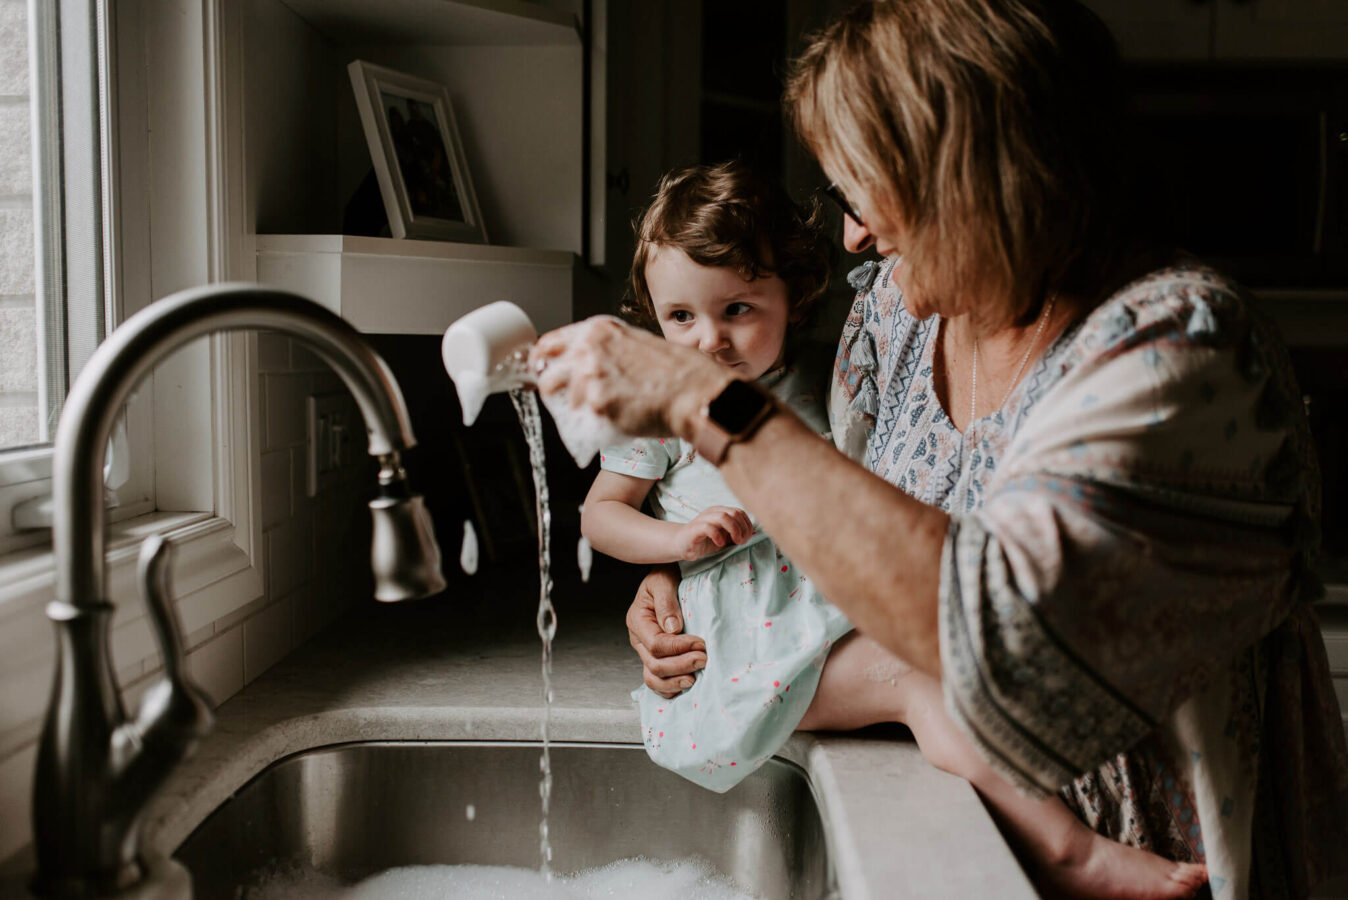 Young girl playing with bubbles in the kitchen sink during a family photoshoot